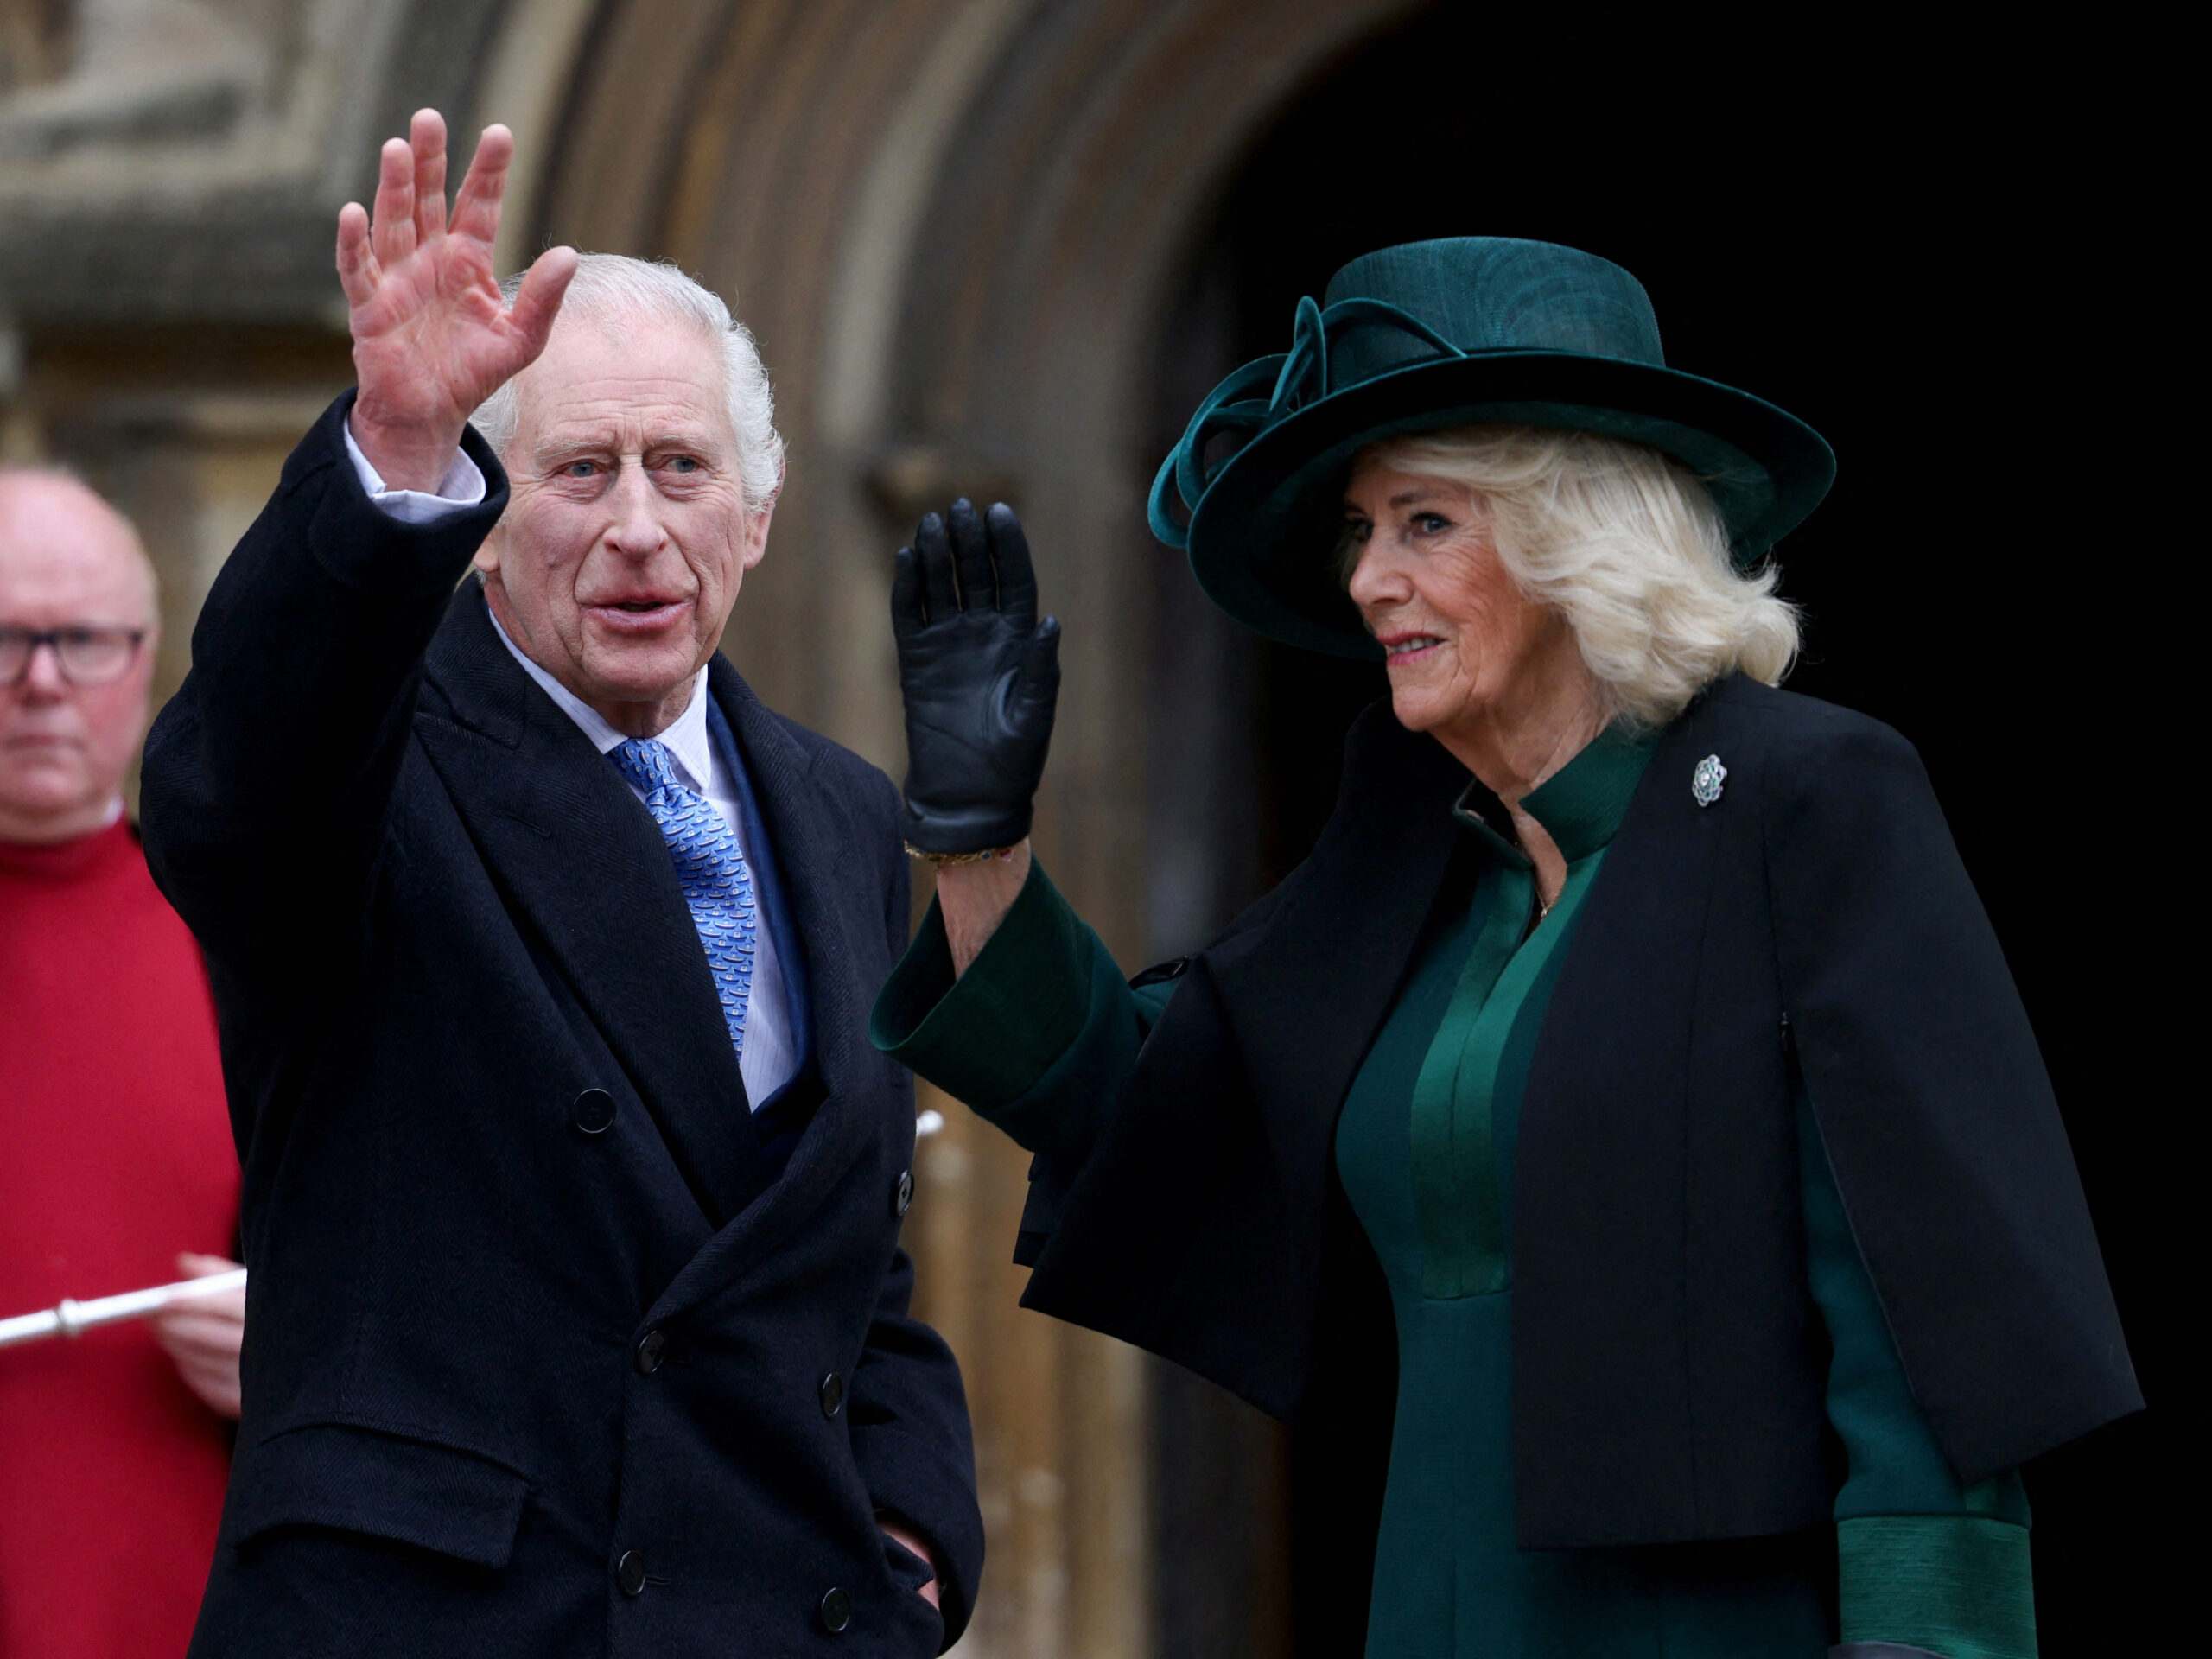 King Charles III is returning to royal duties after his cancer diagnosis